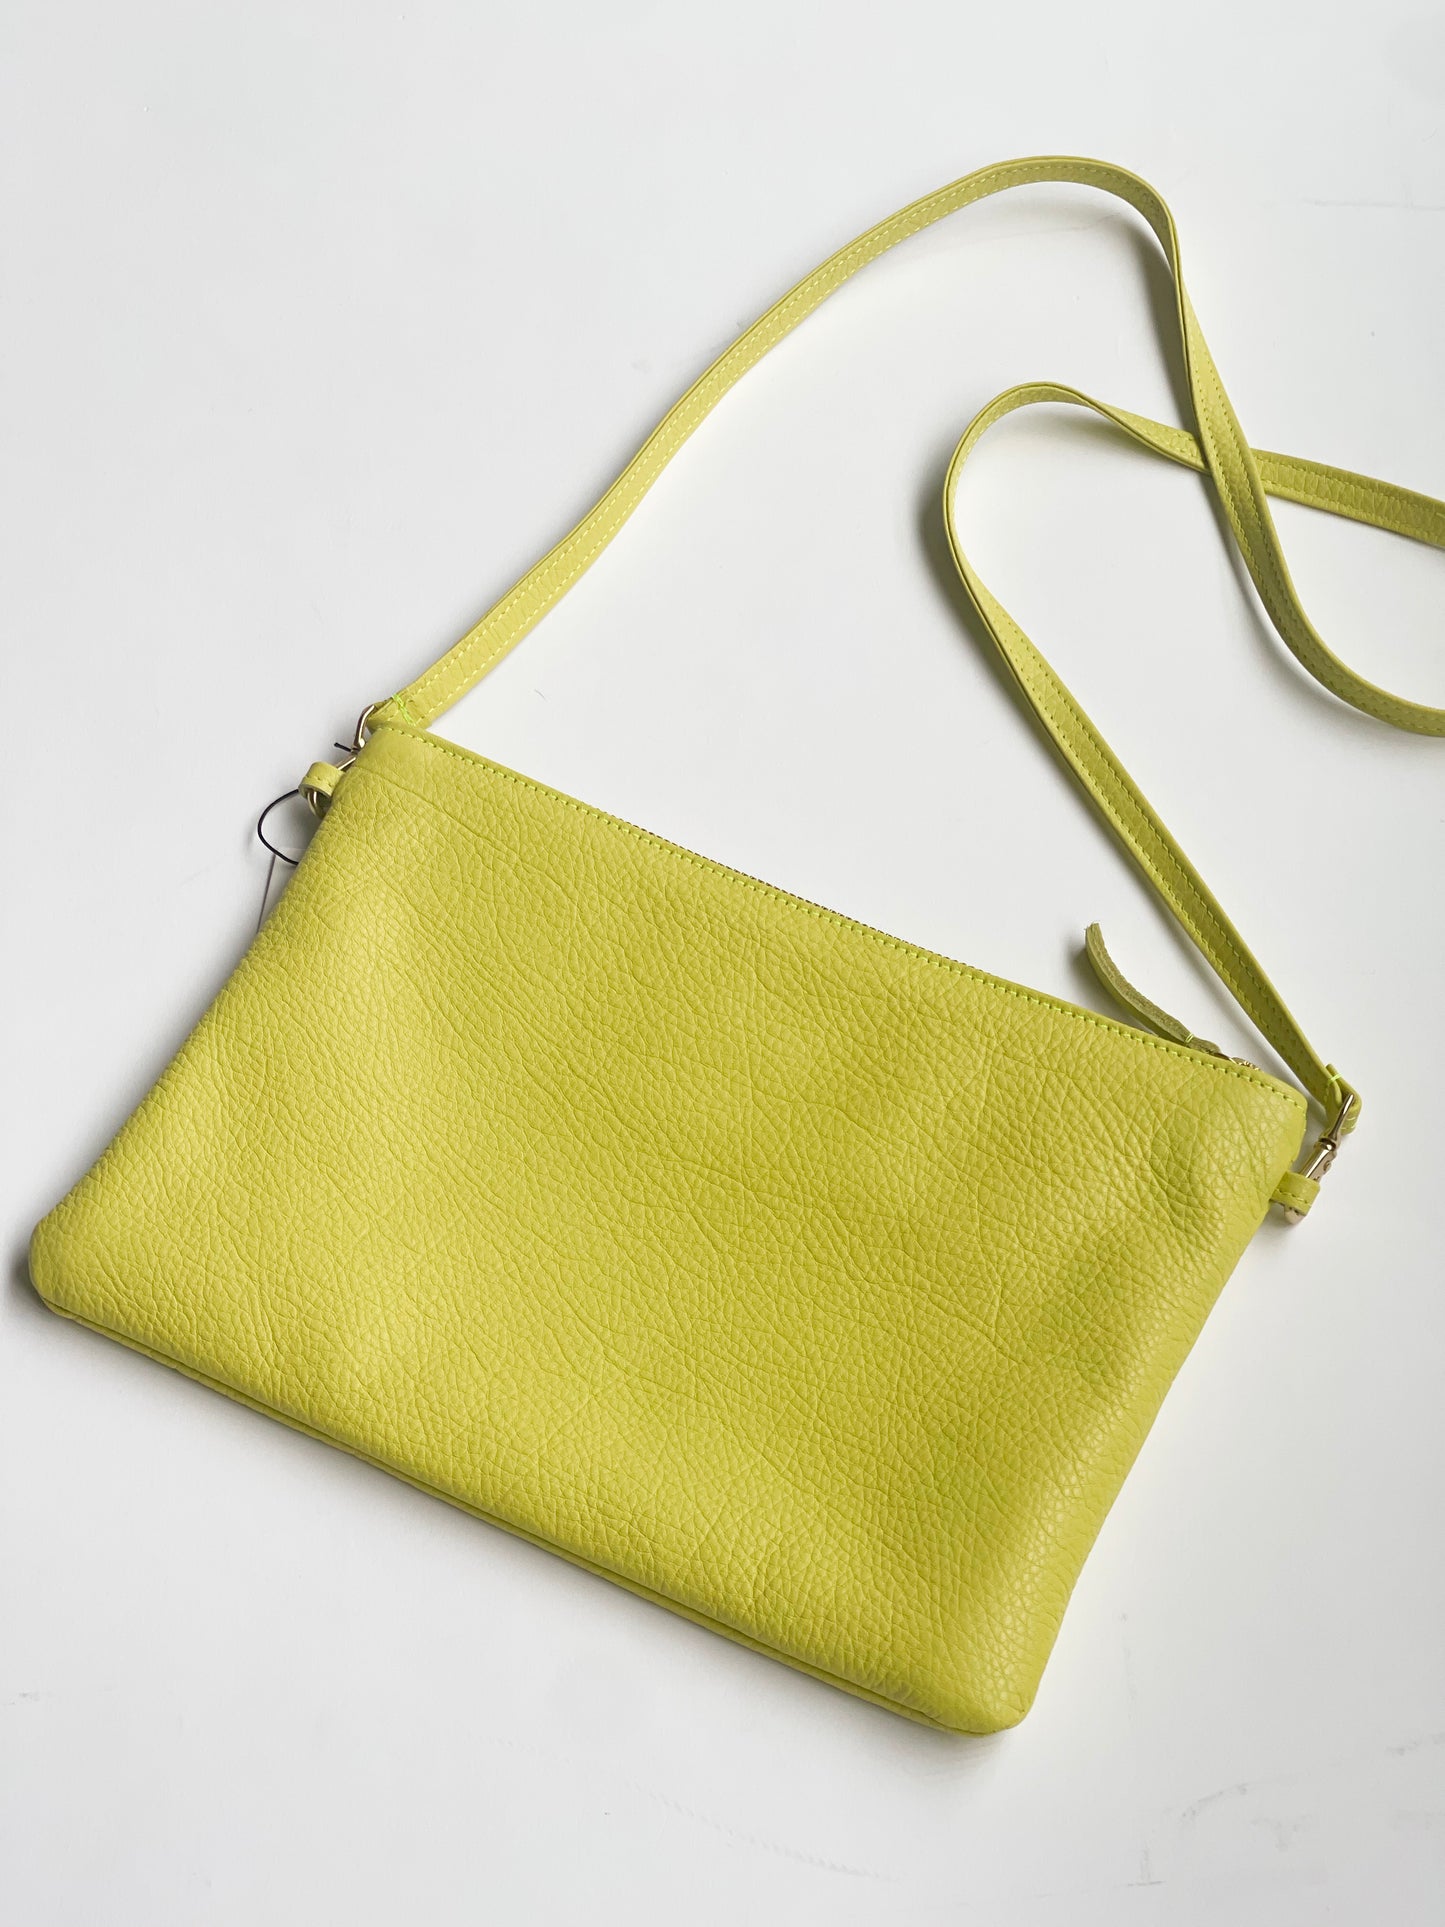 Primecut Leather Pouch Purse in CHARTREUSE